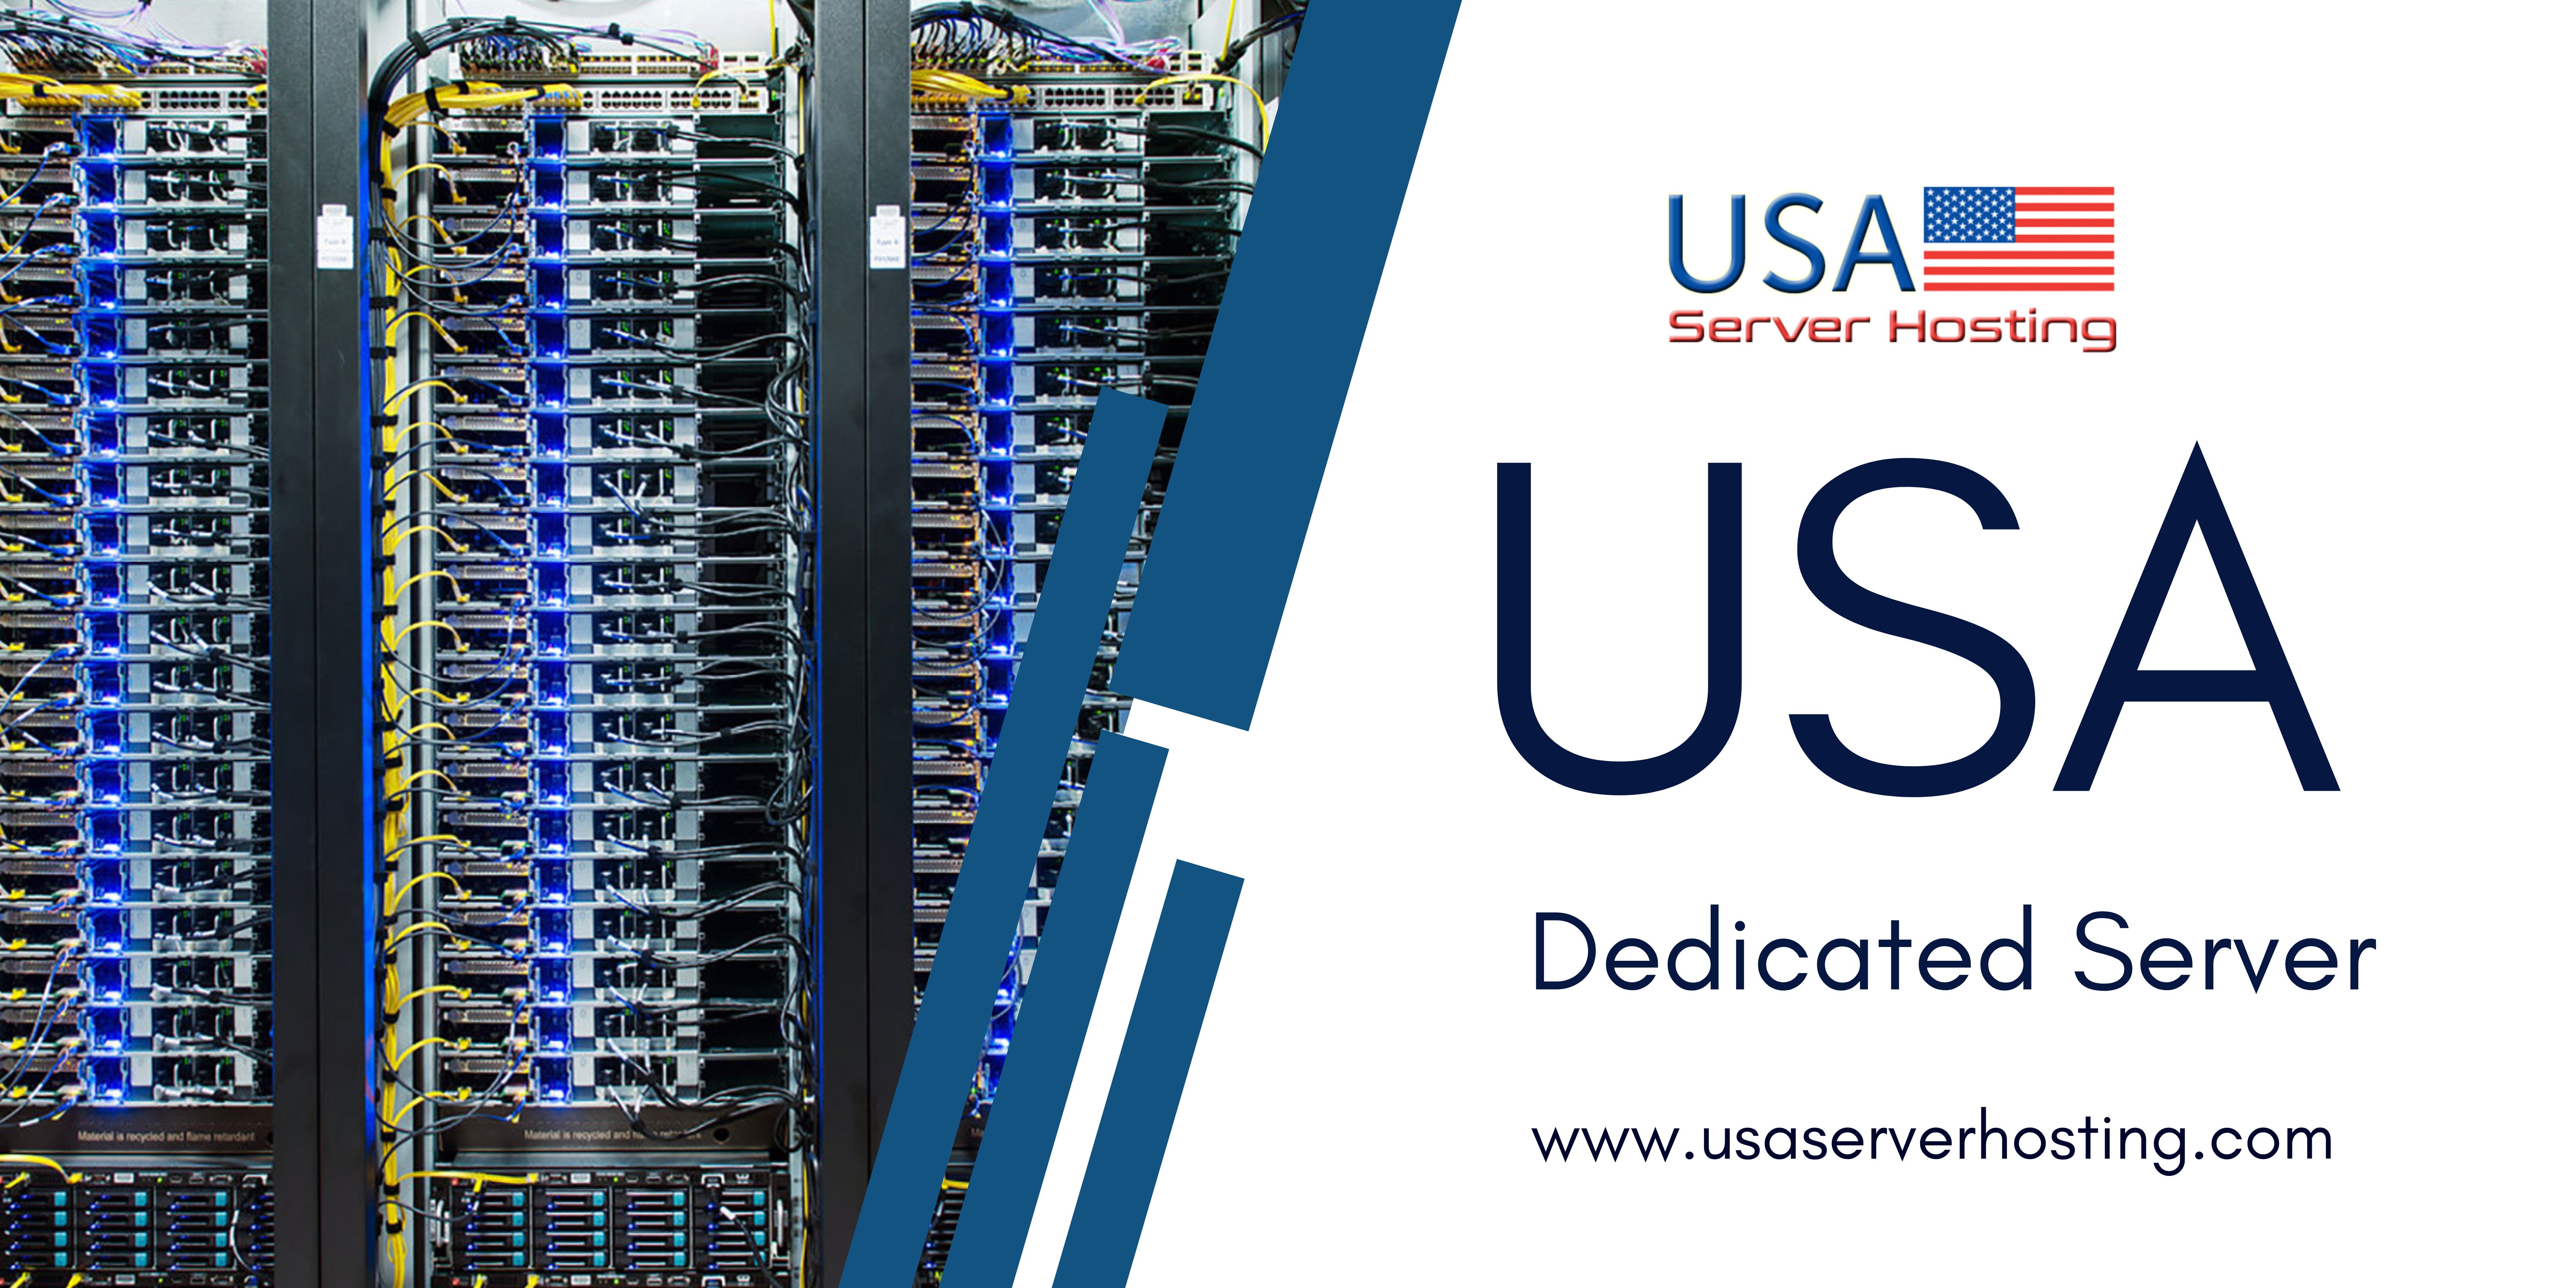 USA Dedicated Server from USA Server offers Rock Solid Reliability, Online Event